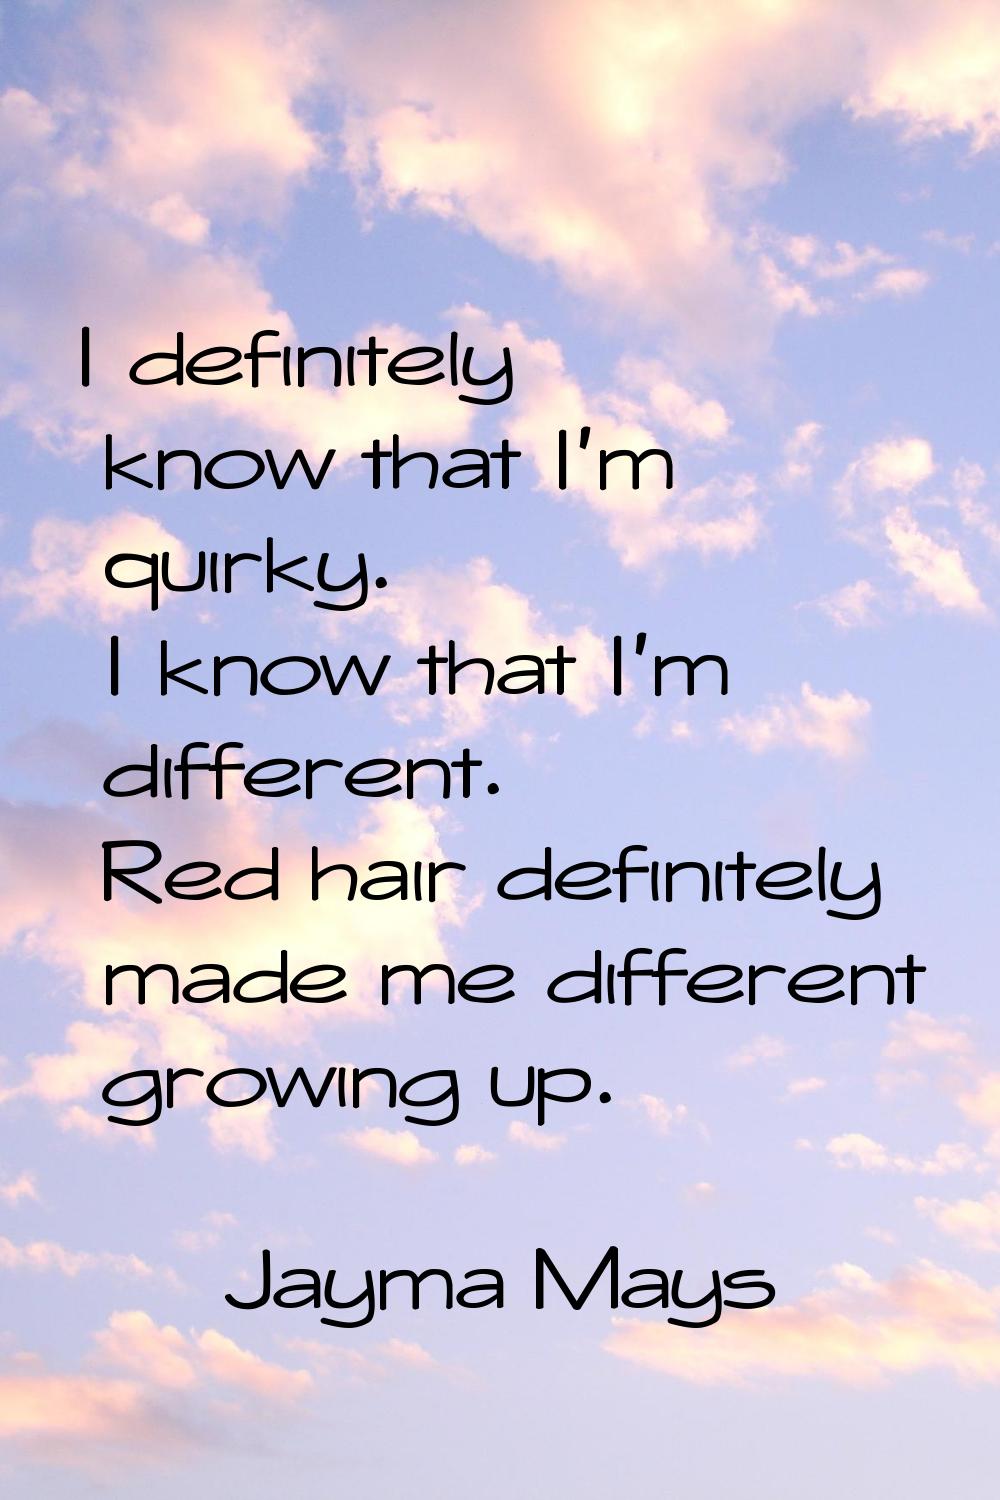 I definitely know that I'm quirky. I know that I'm different. Red hair definitely made me different